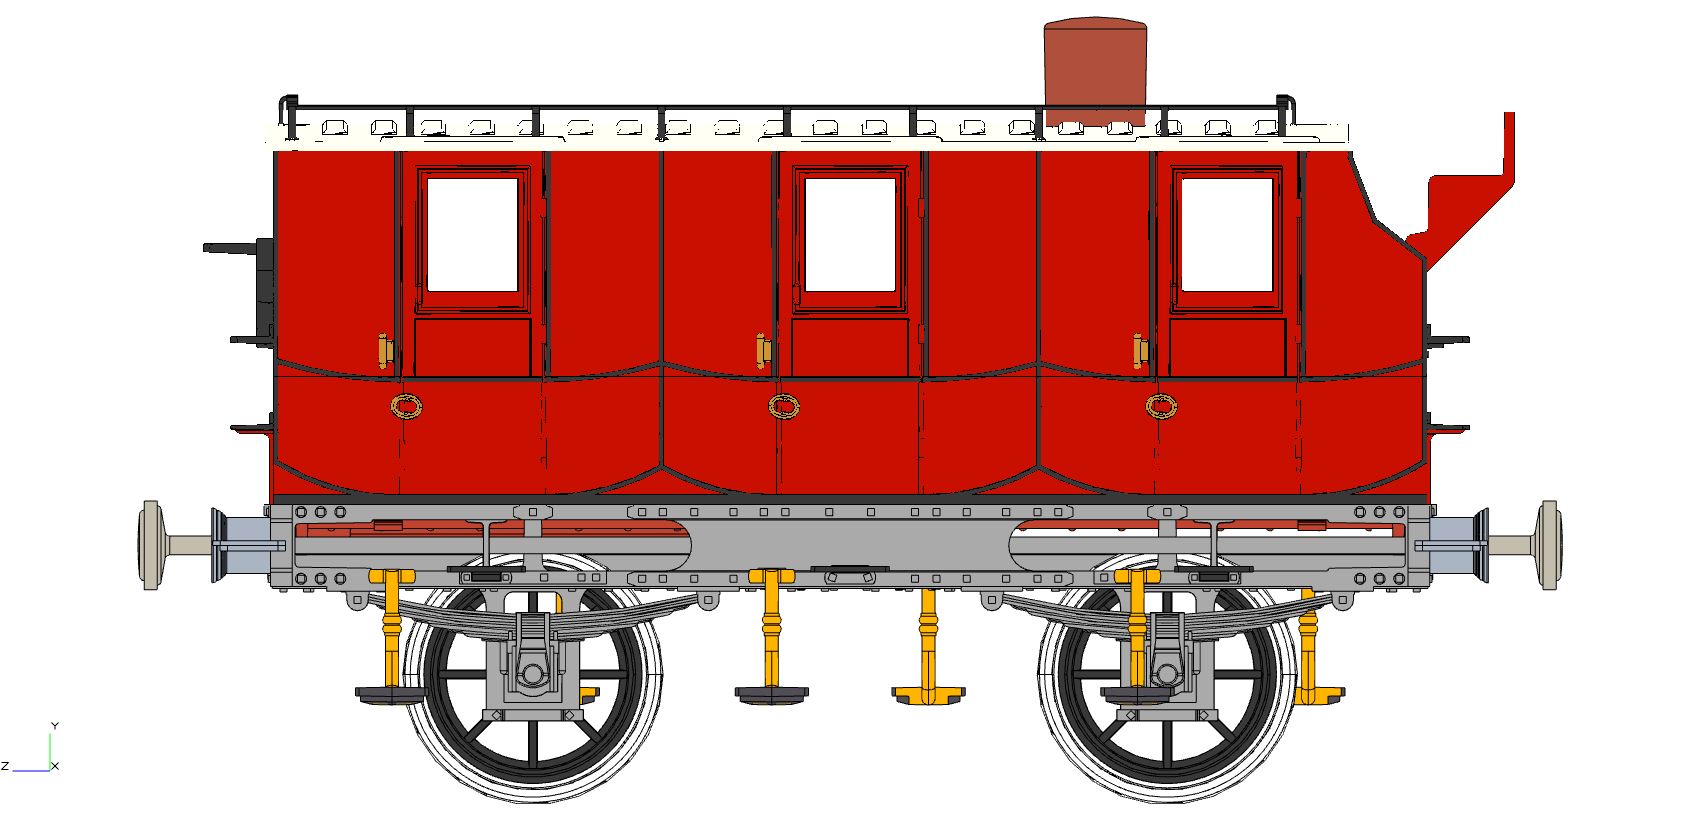 A side-on view of the CAD for the Royal Mail coach 